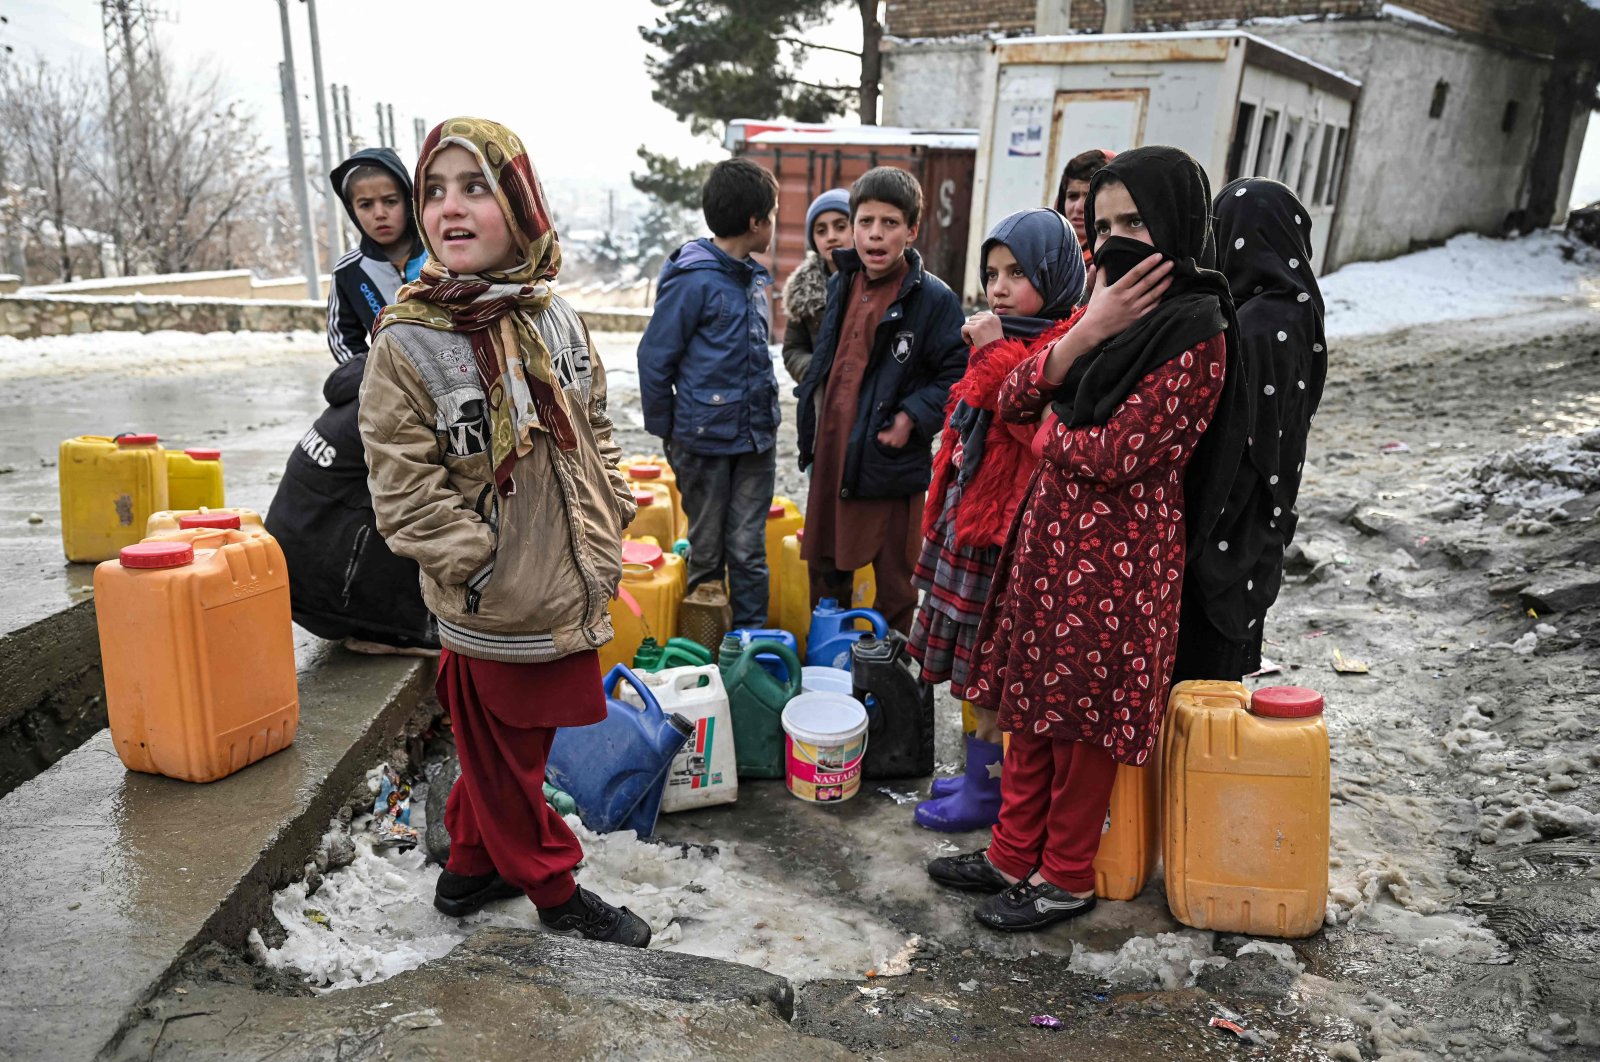 Children wait to fill jerry cans with waters on a cold day in Kabul, Afghanistan, Jan. 22, 2022. (AFP Photo)